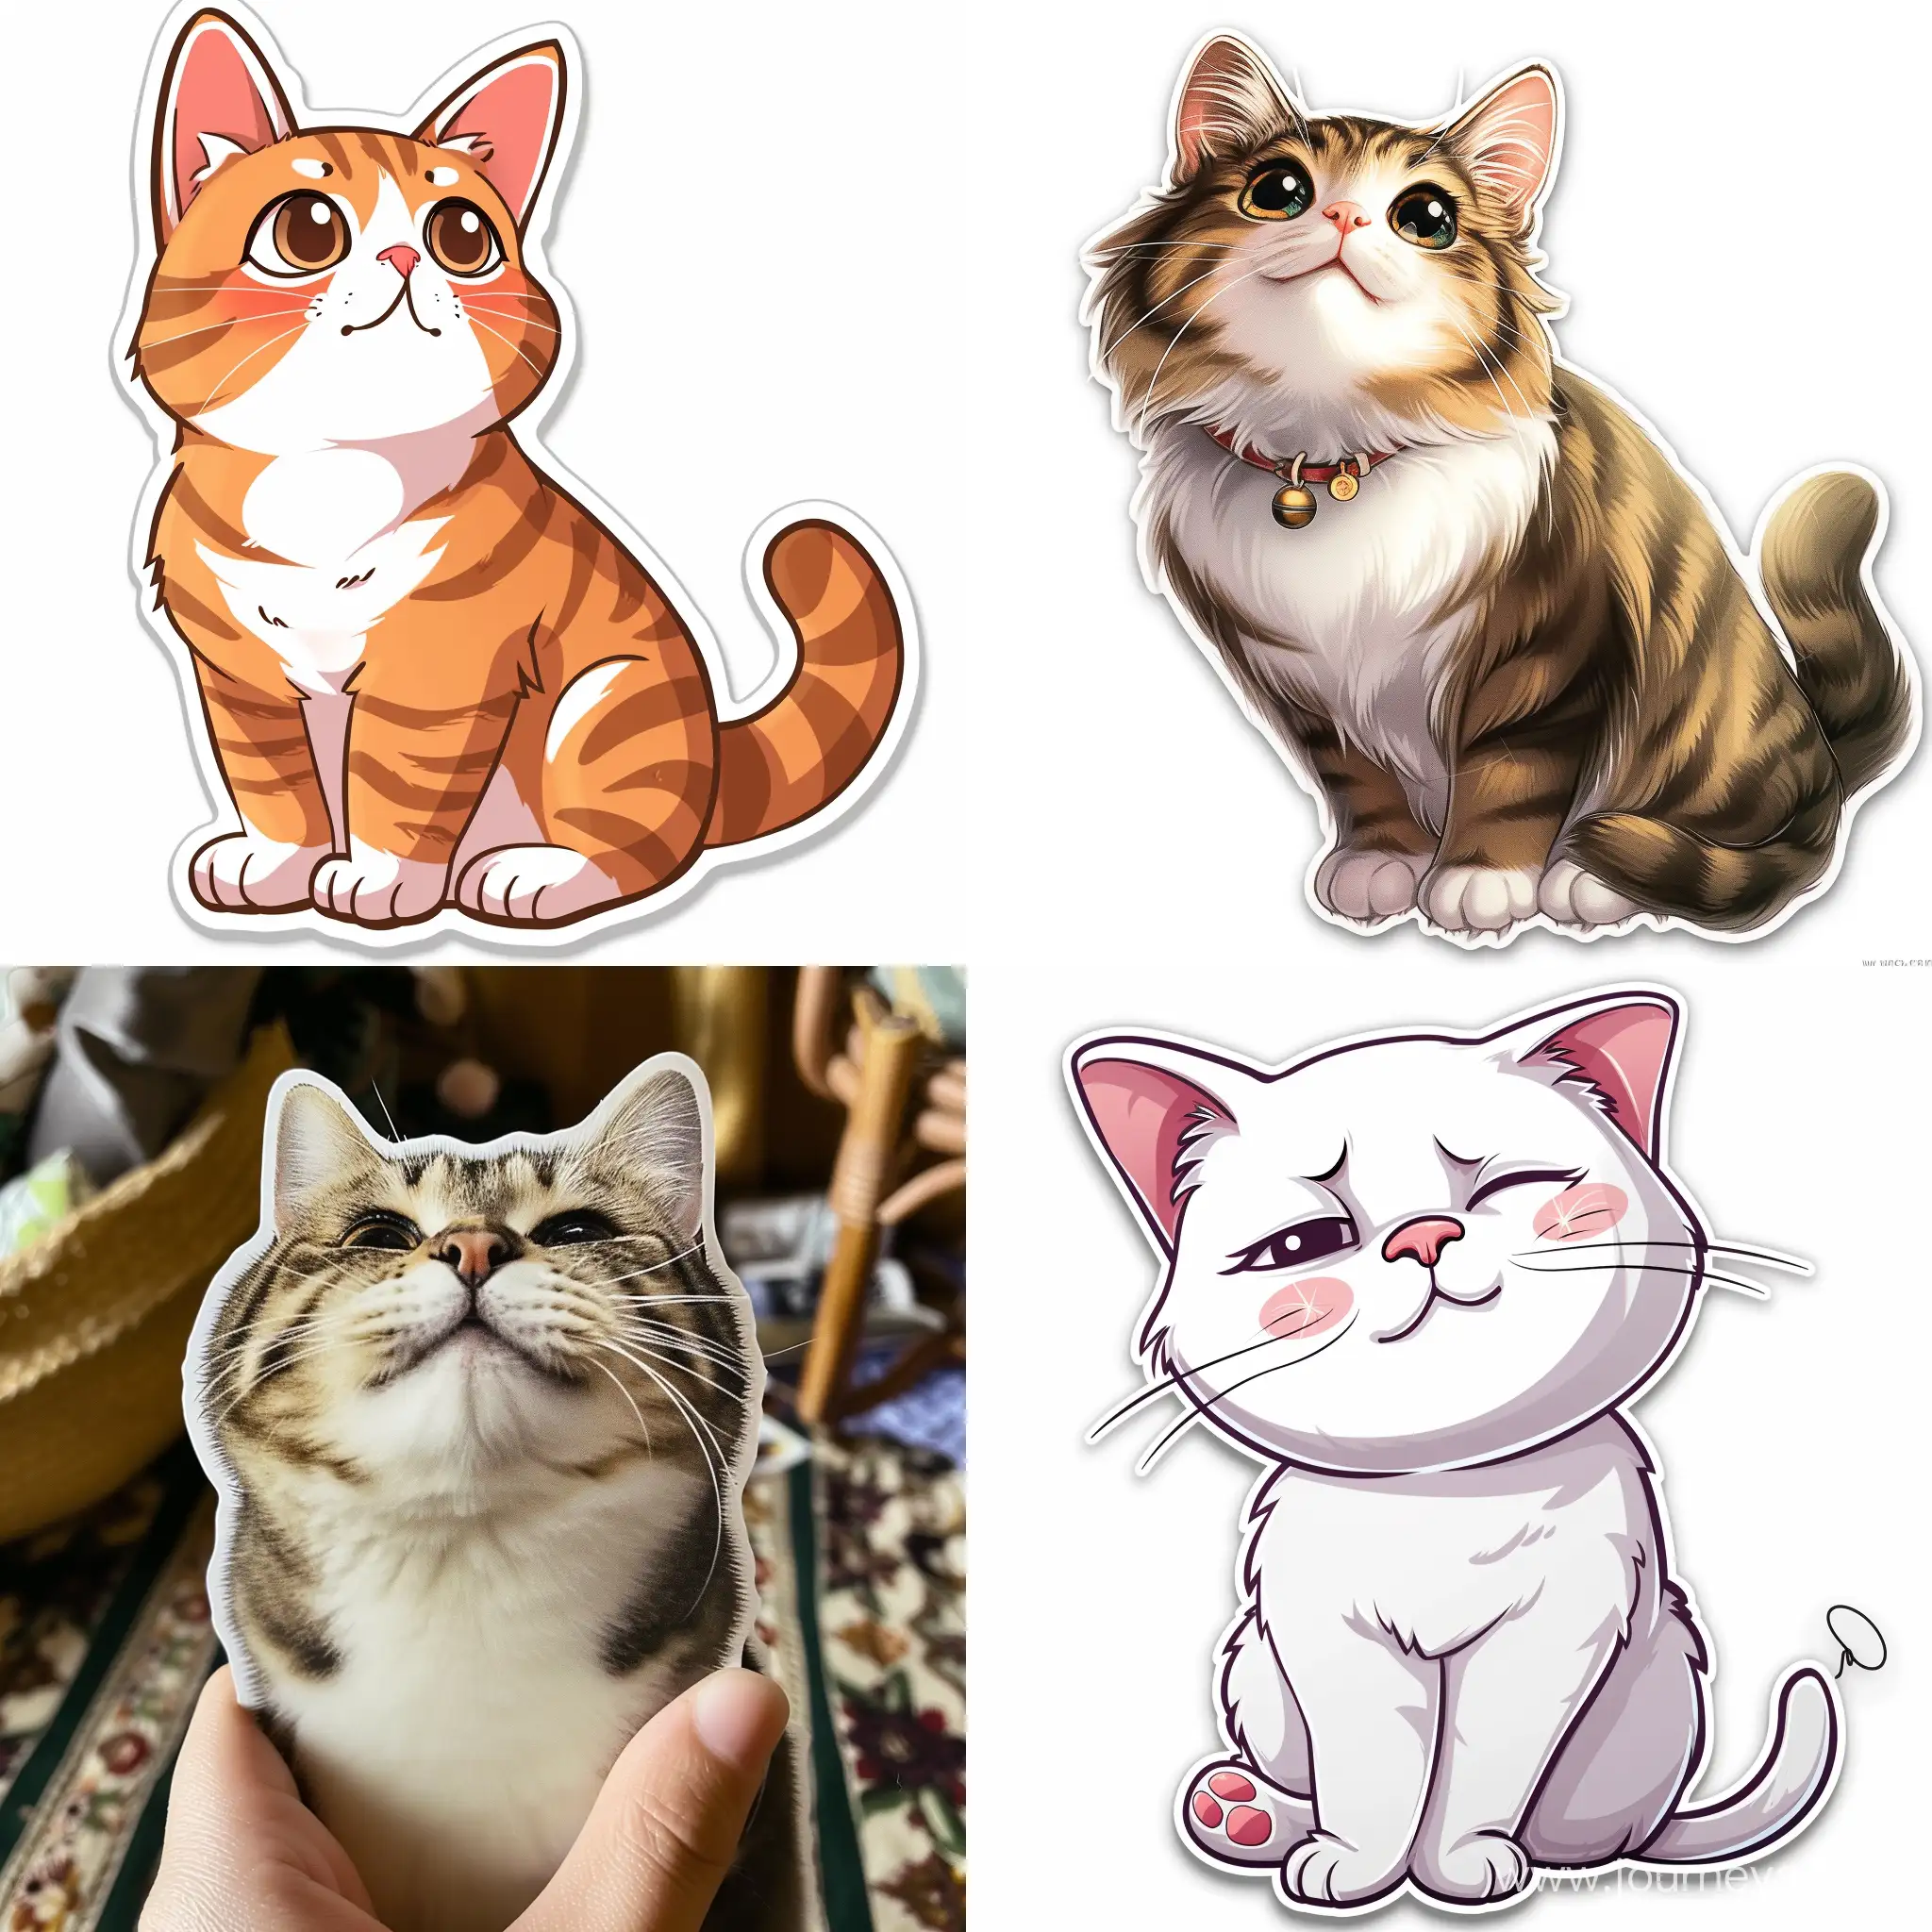 Adorable-Cat-Sticker-in-High-Definition-HD-Vibrant-and-Cute-Visuals